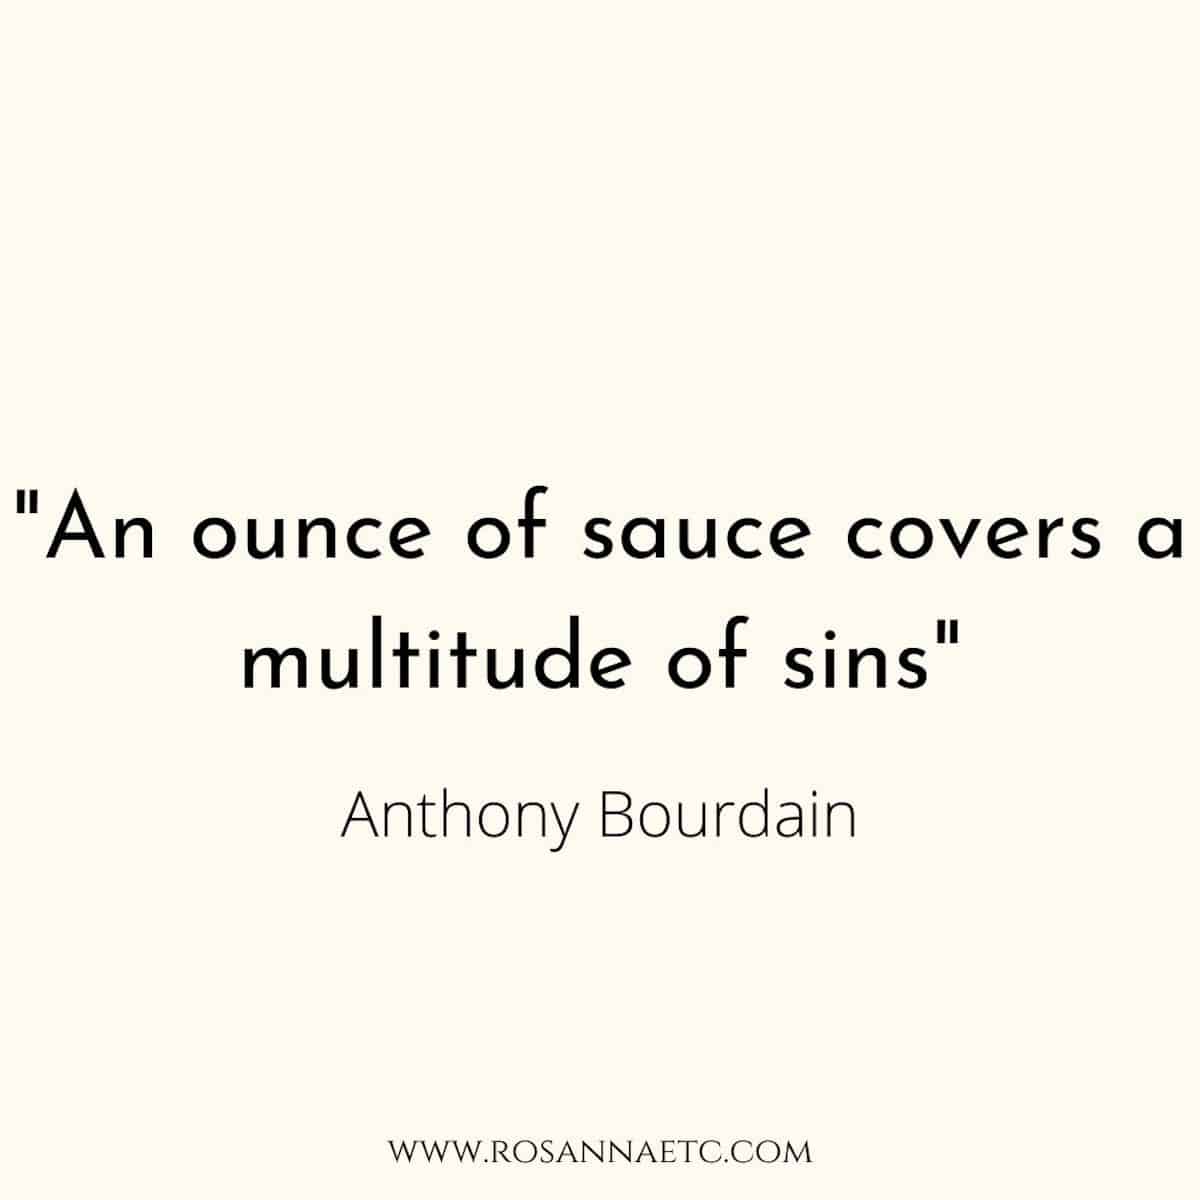 A quote that reads "an ounce of sauce covers a multitude of sins" by Anthony Bourdain